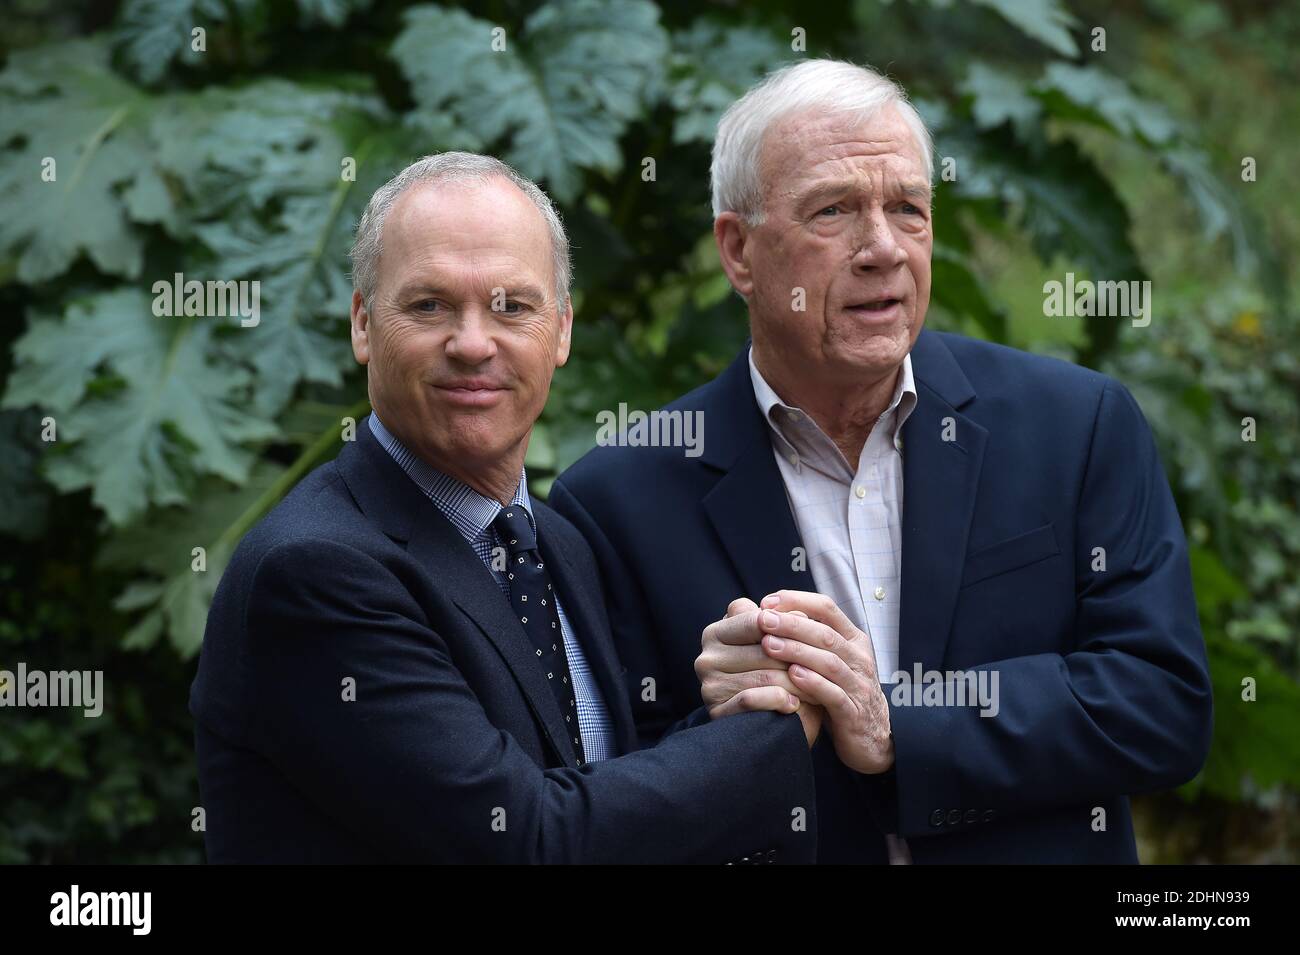 Michael Keaton and Walter Robinson attend the photocall of the film ' Spotlight' on January 23, 2016 in Rome, Italy. Photo by Eric Vandeville  /ABACAPRESS.COM Stock Photo - Alamy